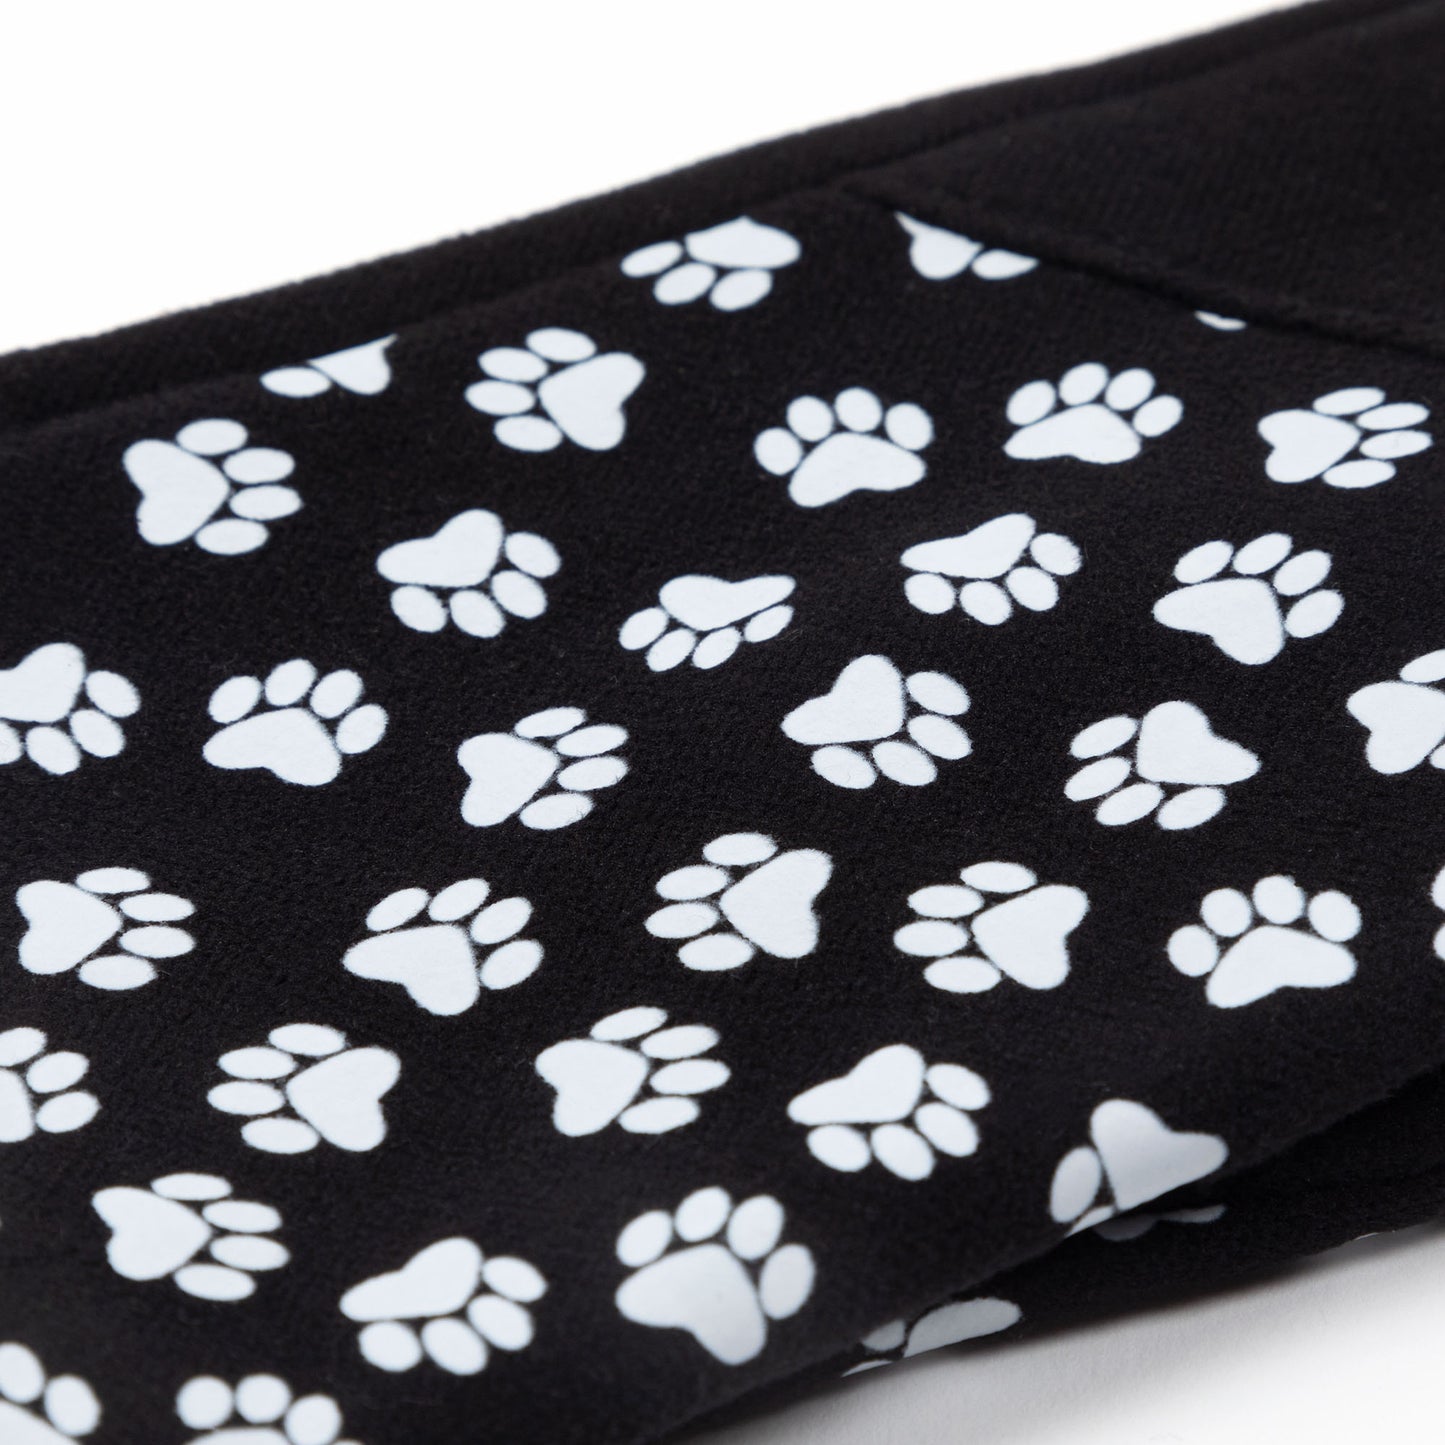 Vibrant Paws Touch Screen Gloves